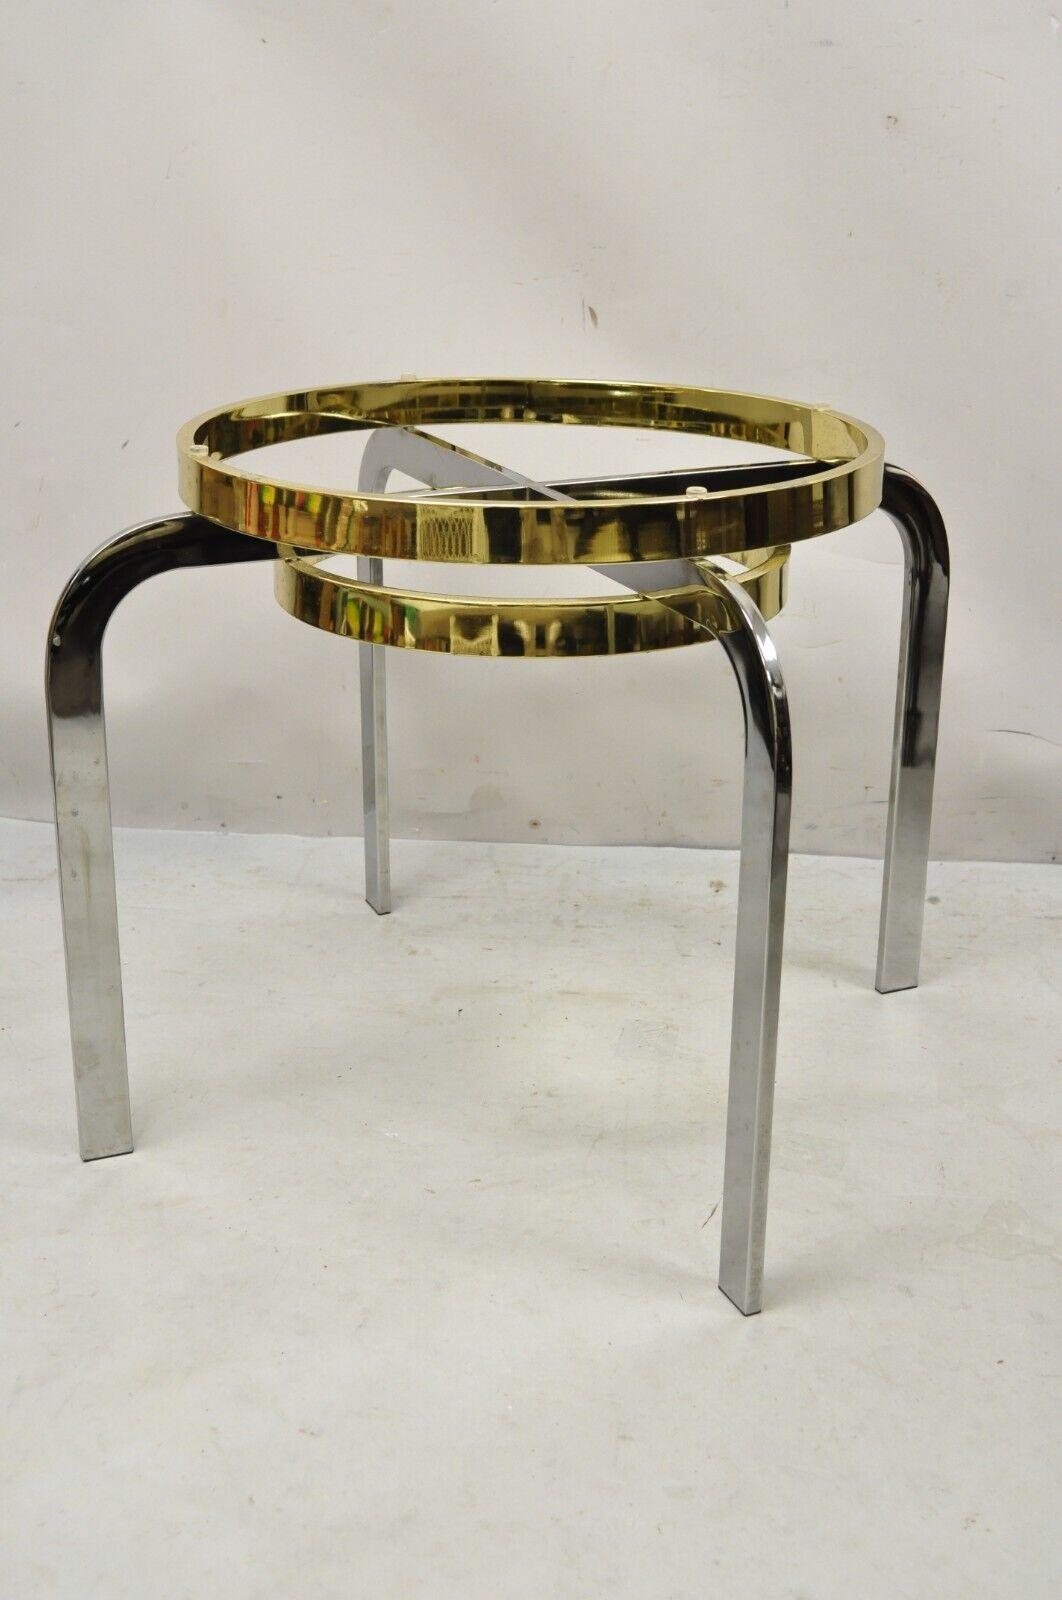 Vintage Mid-Century Modern Milo Baughman Style Chrome Brass Round Side Table In Good Condition For Sale In Philadelphia, PA